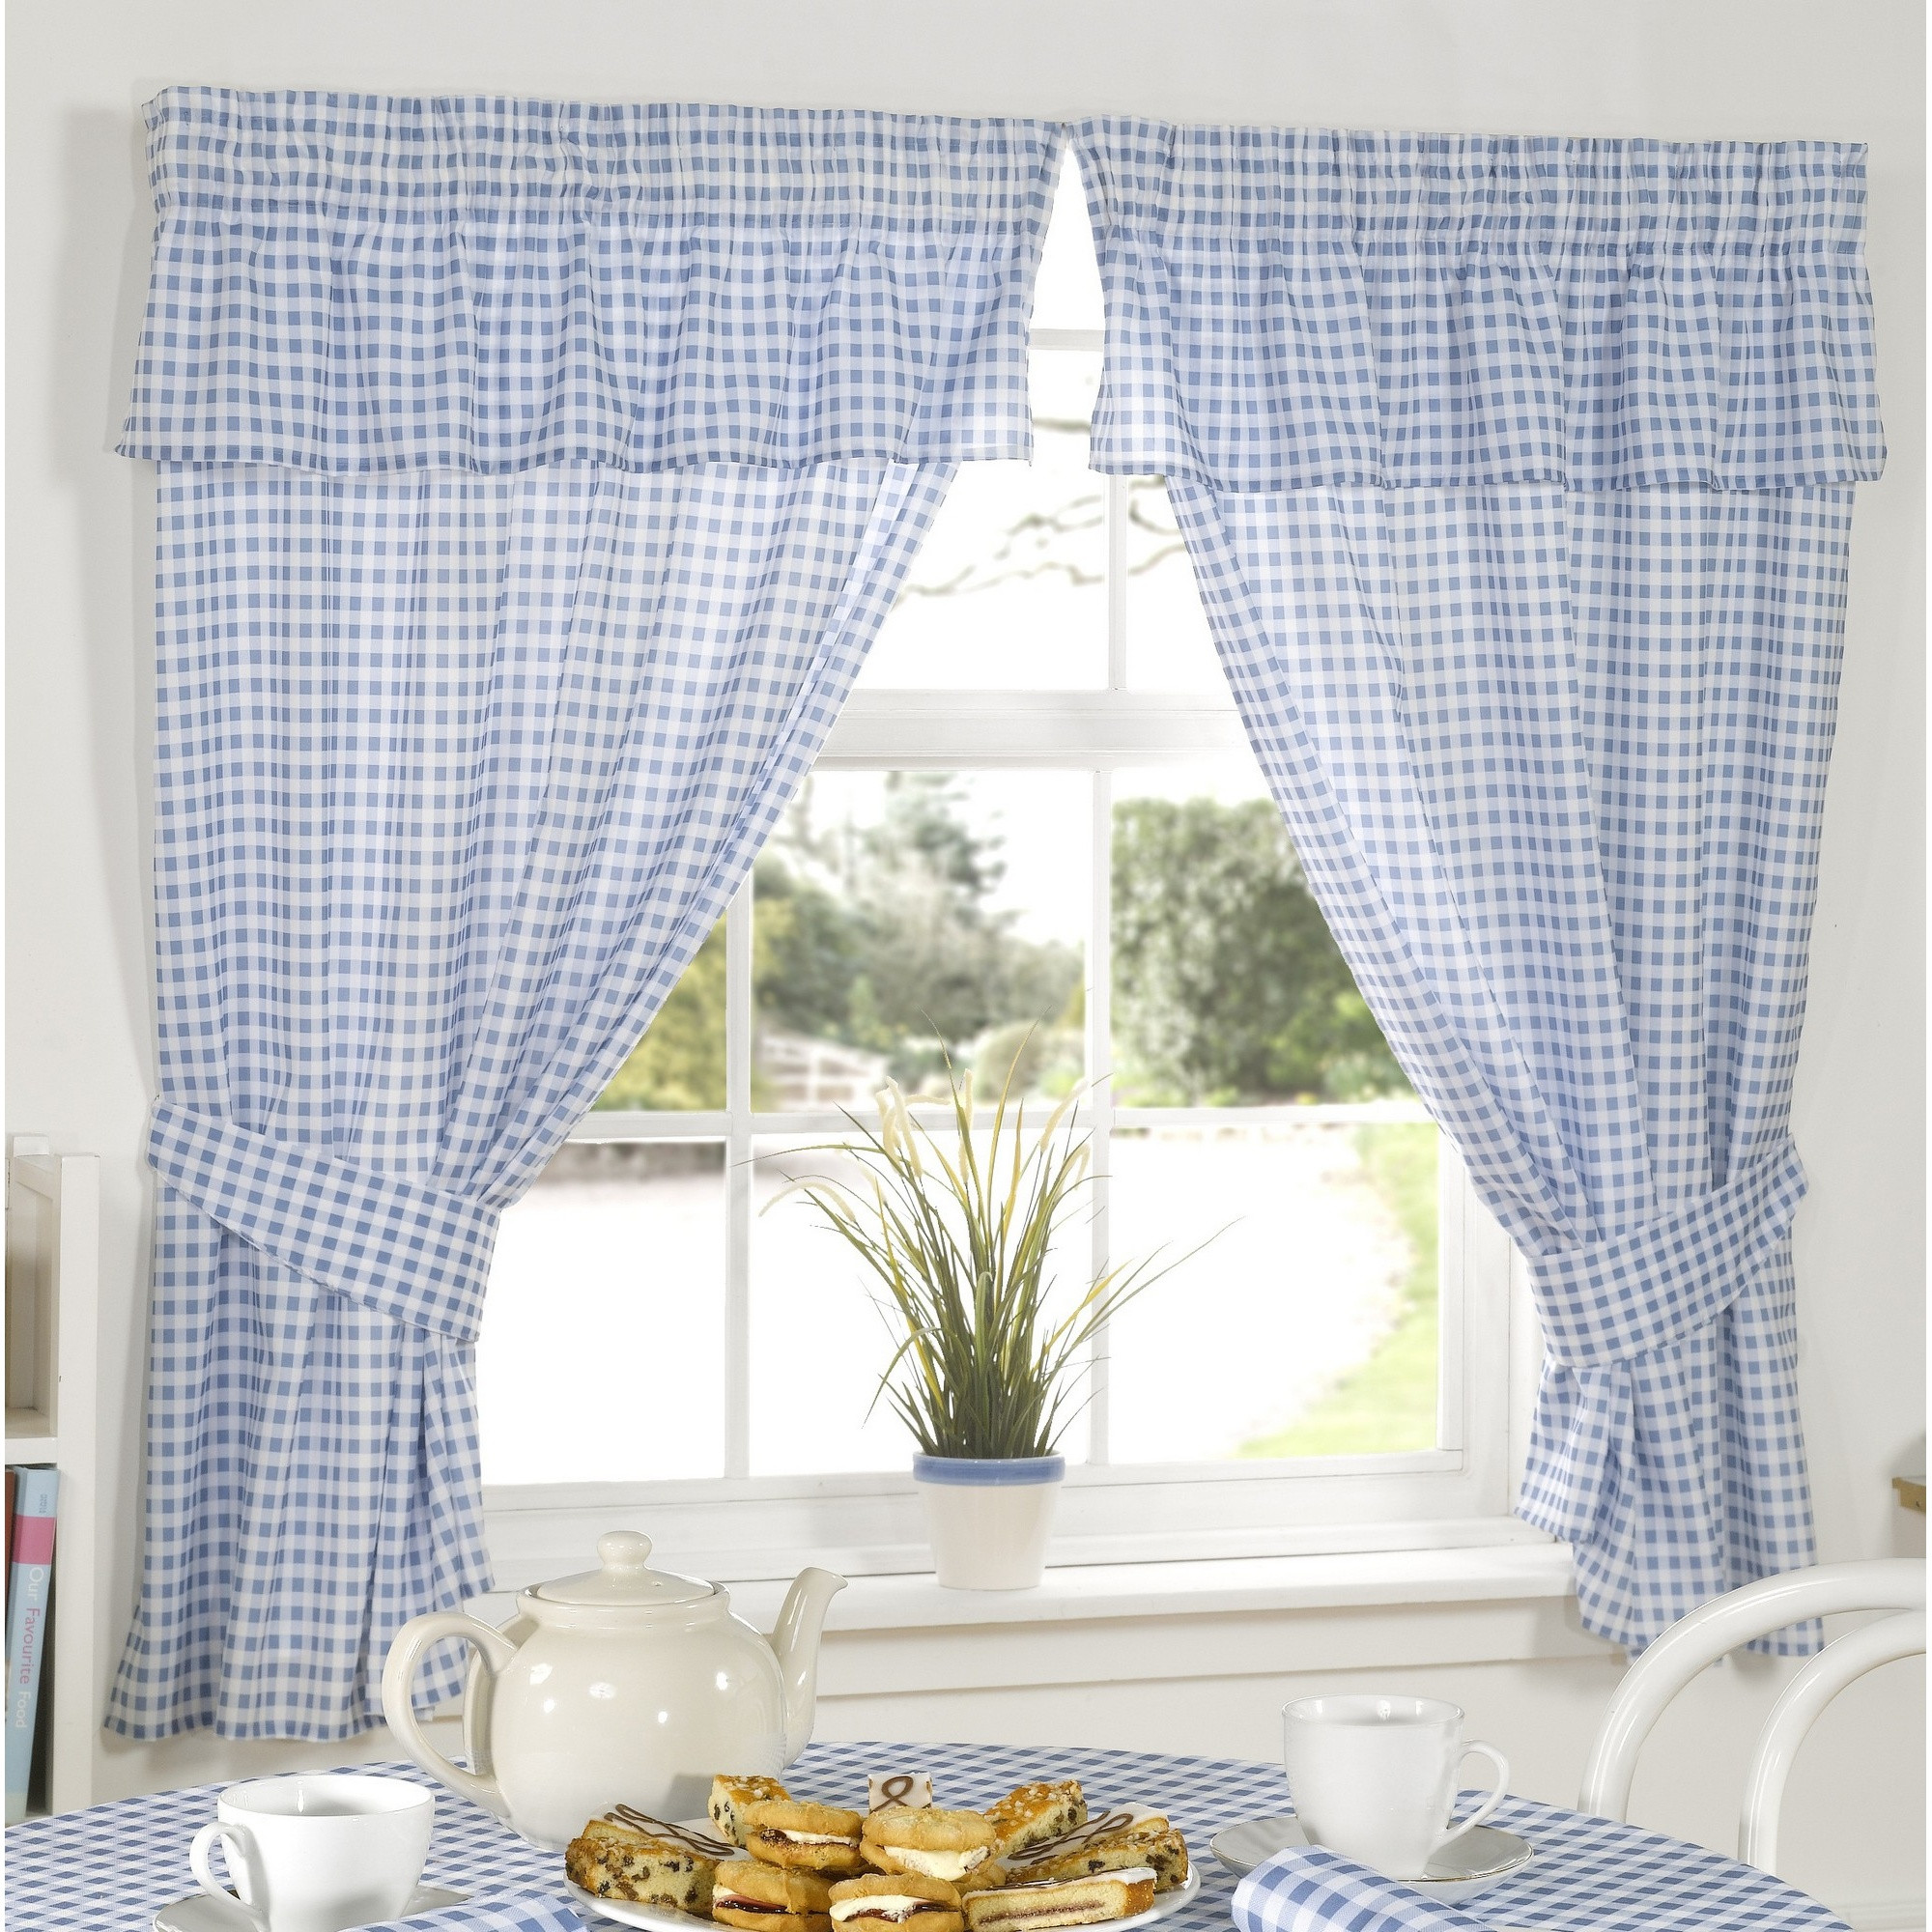 Gingham Kitchen Curtains
 Molly Gingham Check Pattern Ready Made Kitchen Curtains